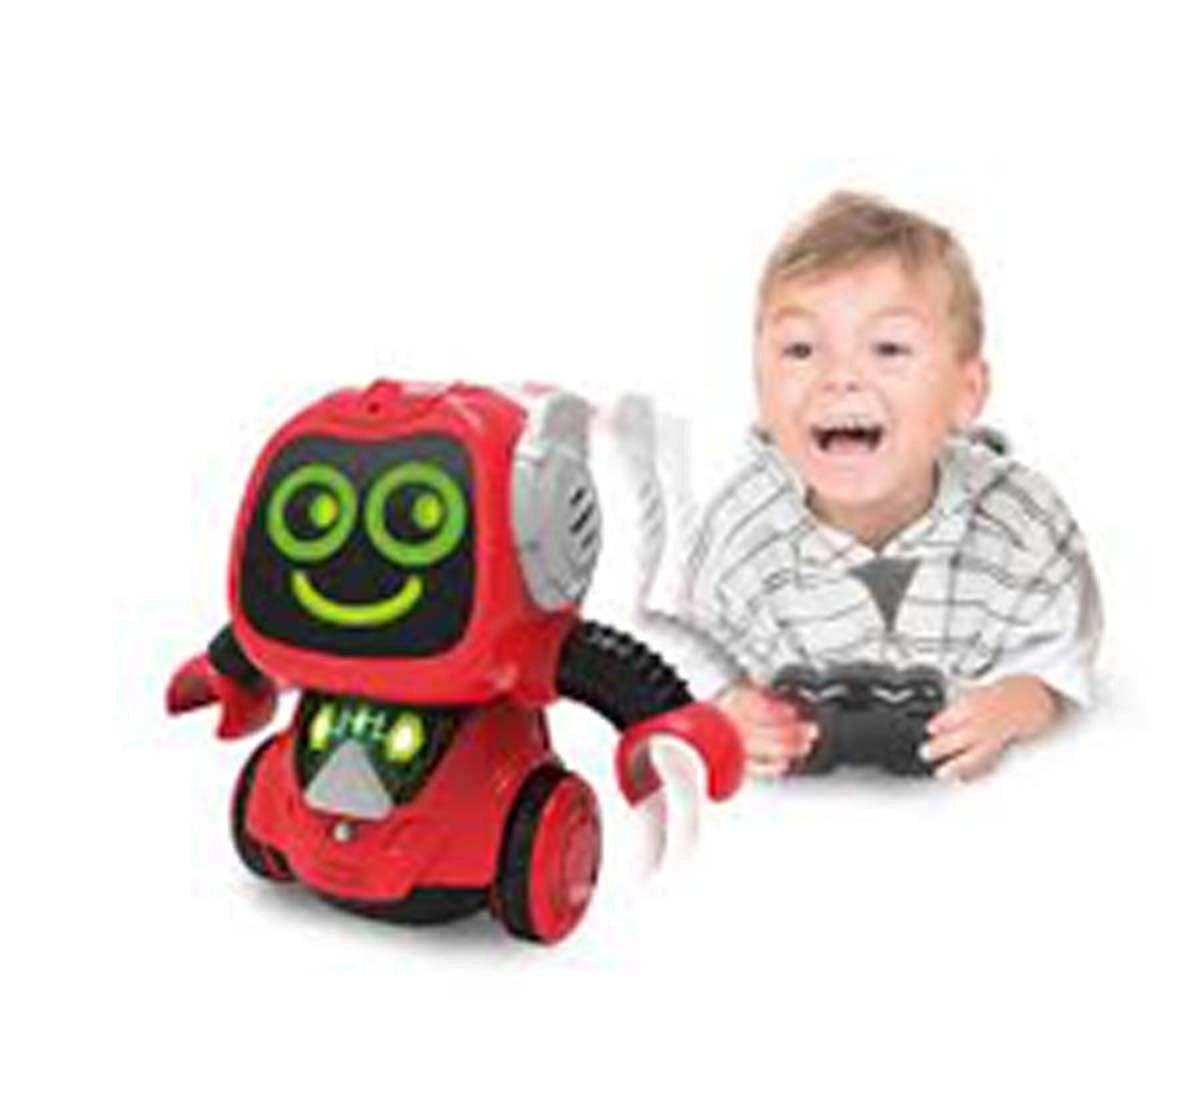 Winfun Remote Control Voice Changing Robot - Red Learning Toys for Kids age 2Y+